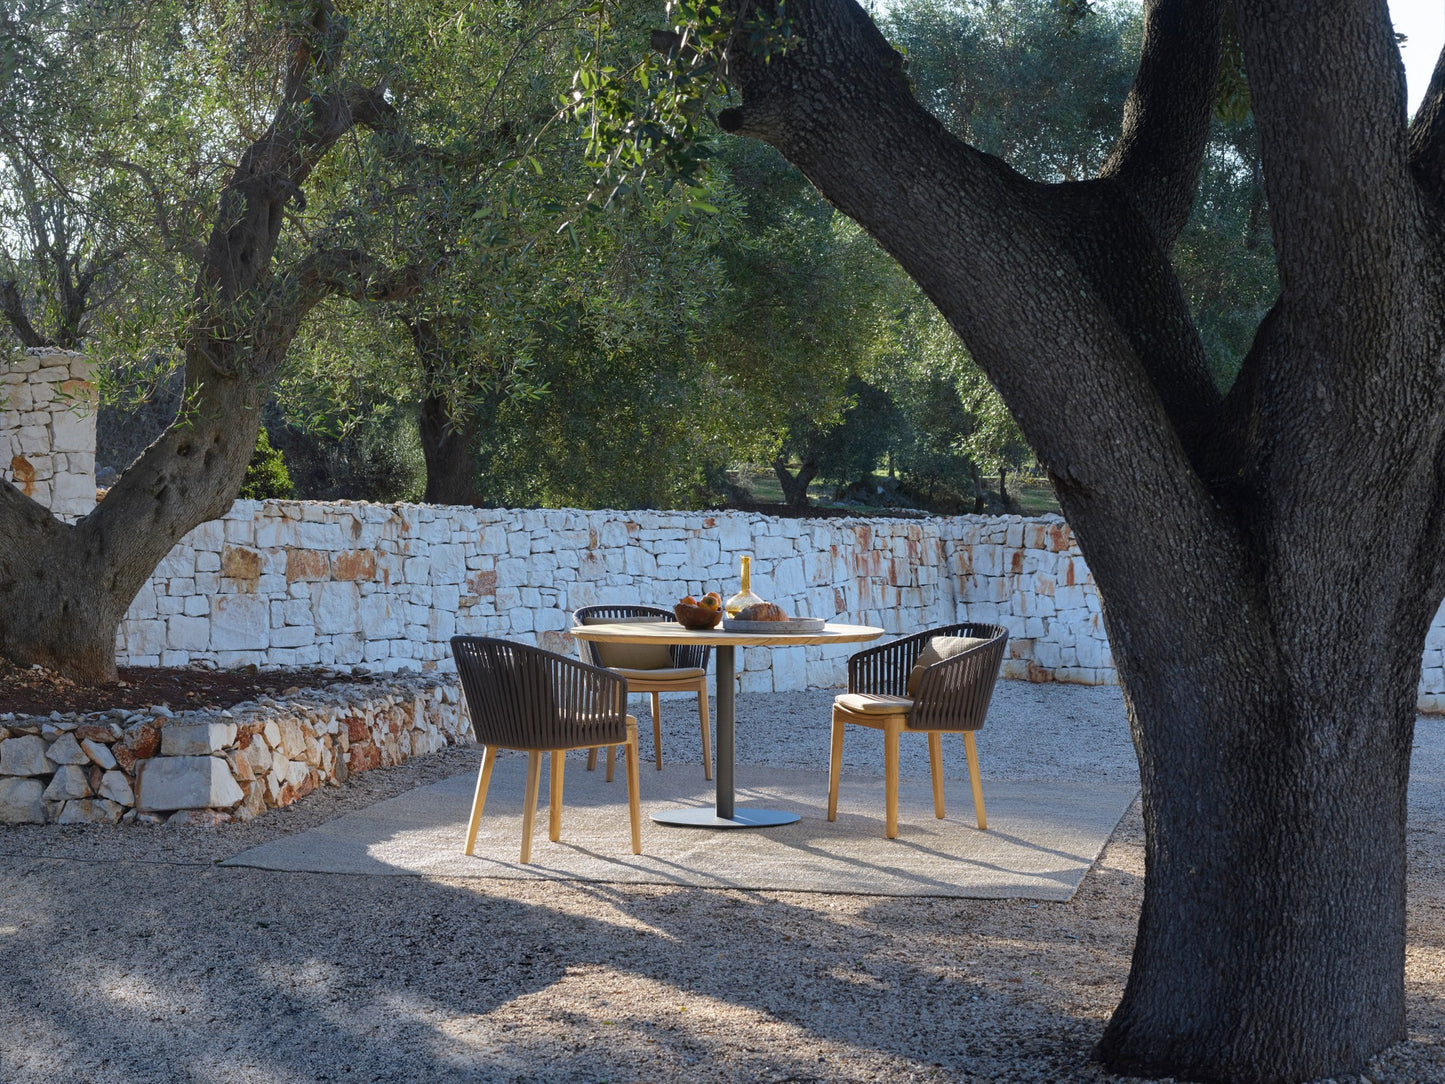 Tribu T-Table Outdoor Dining Table